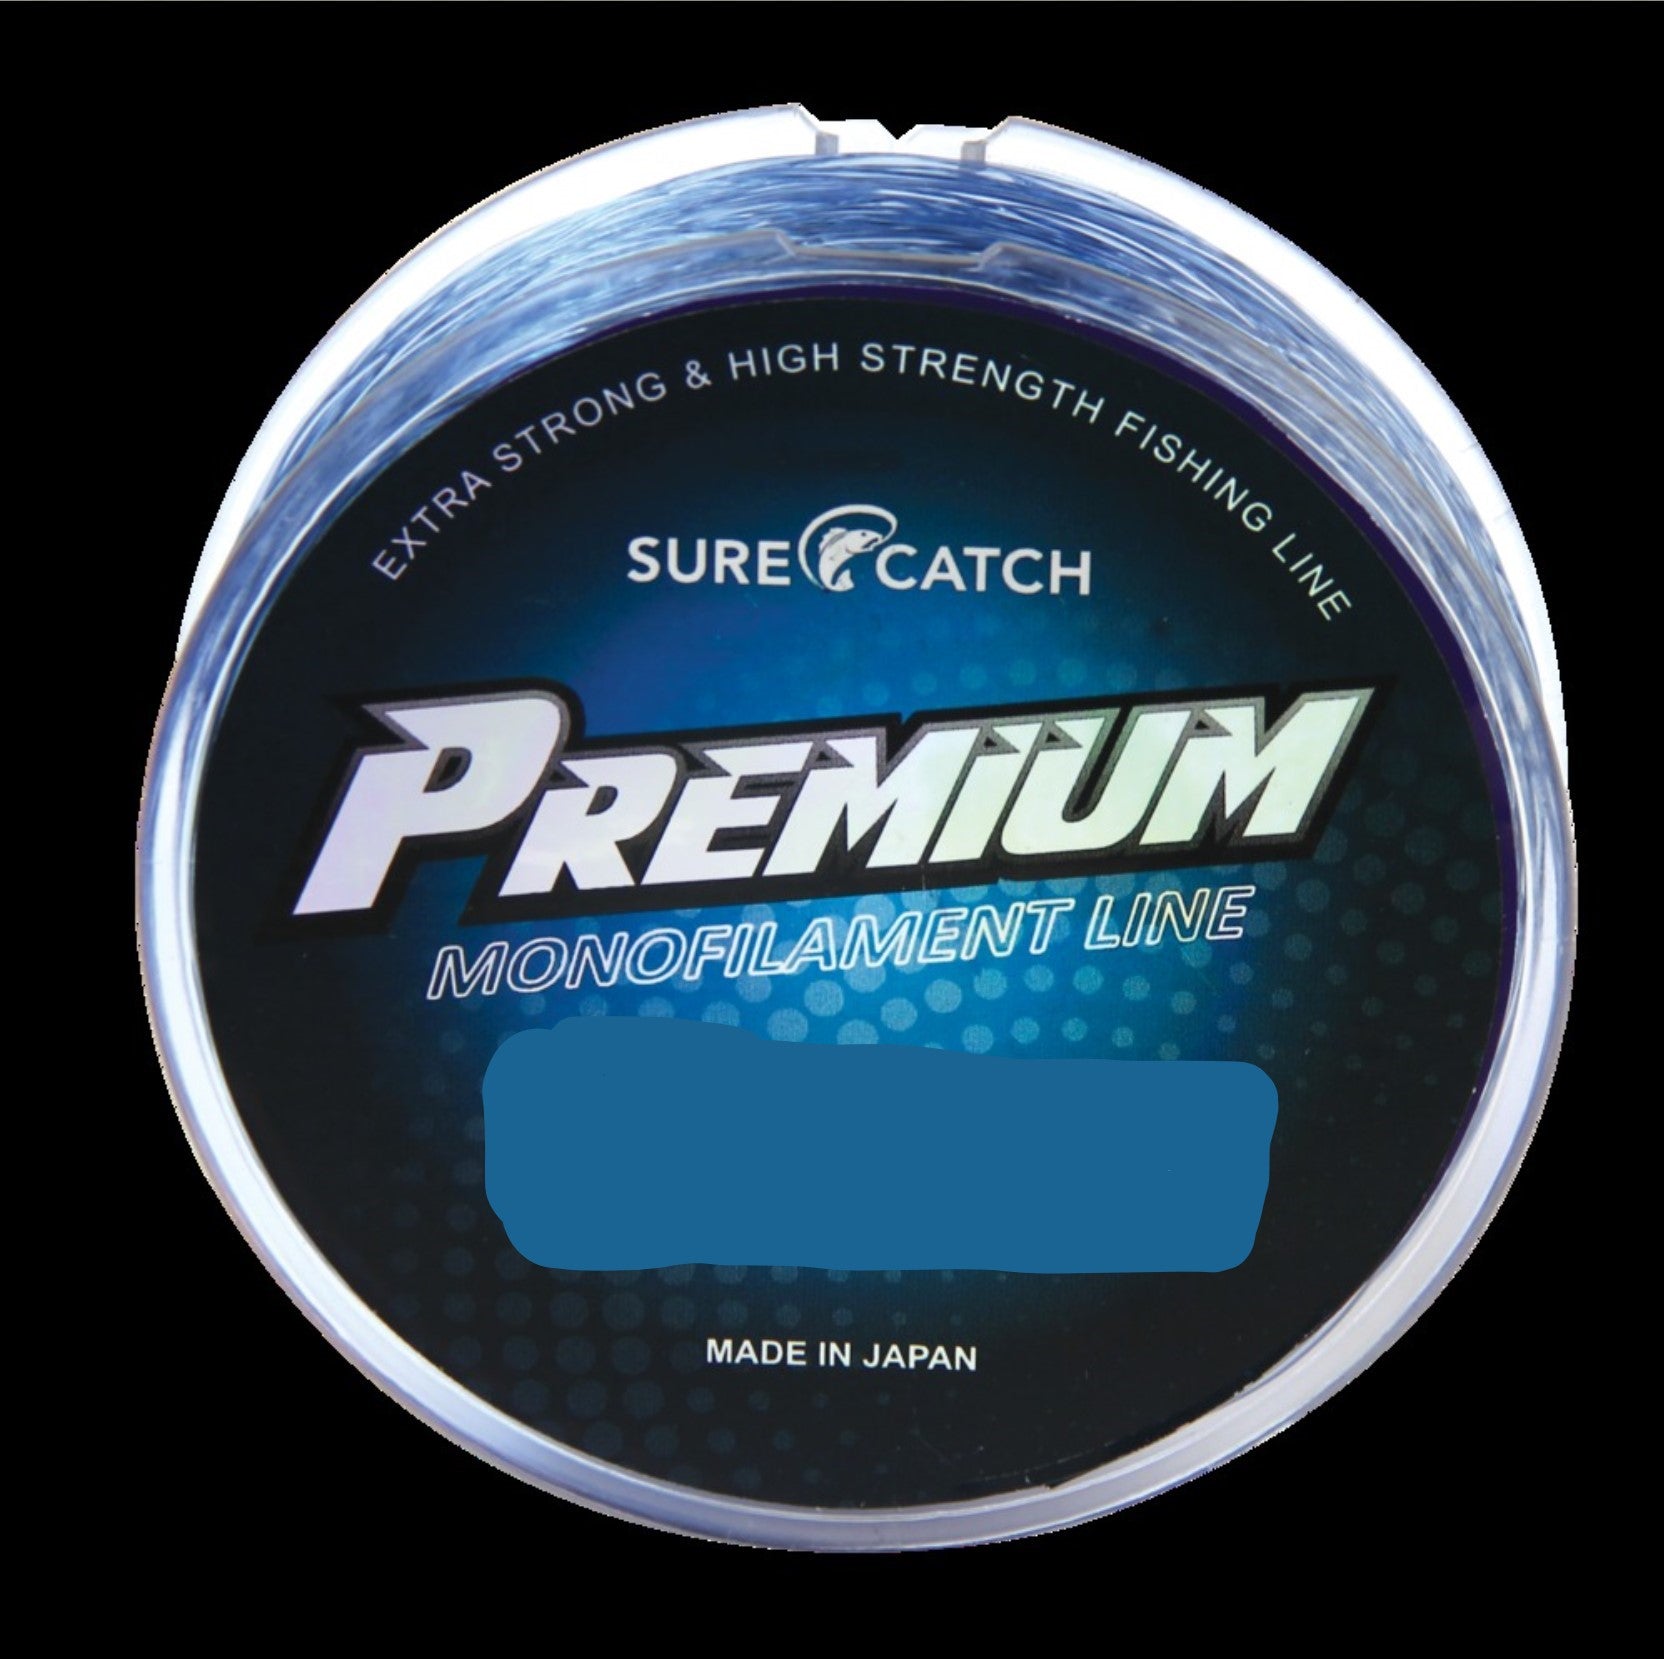 SureCatch Light Surf Rig (Size 1/0 Hook) – Trophy Trout Lures and Fly  Fishing